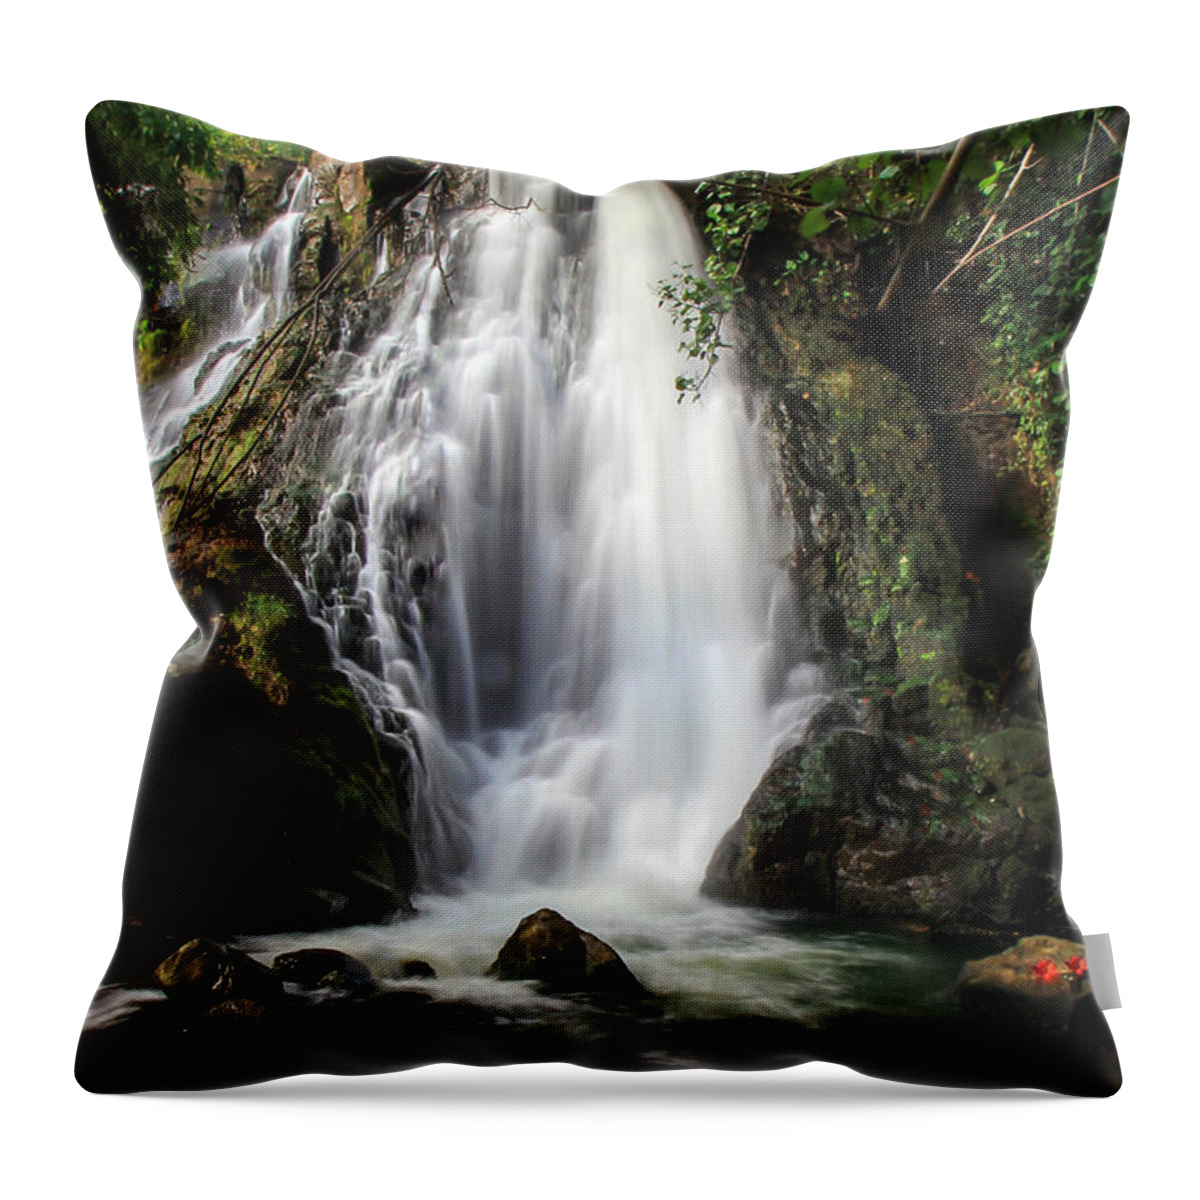 Hoʻopiʻi Falls Throw Pillow featuring the photograph Hoopii Falls by Ryan Smith